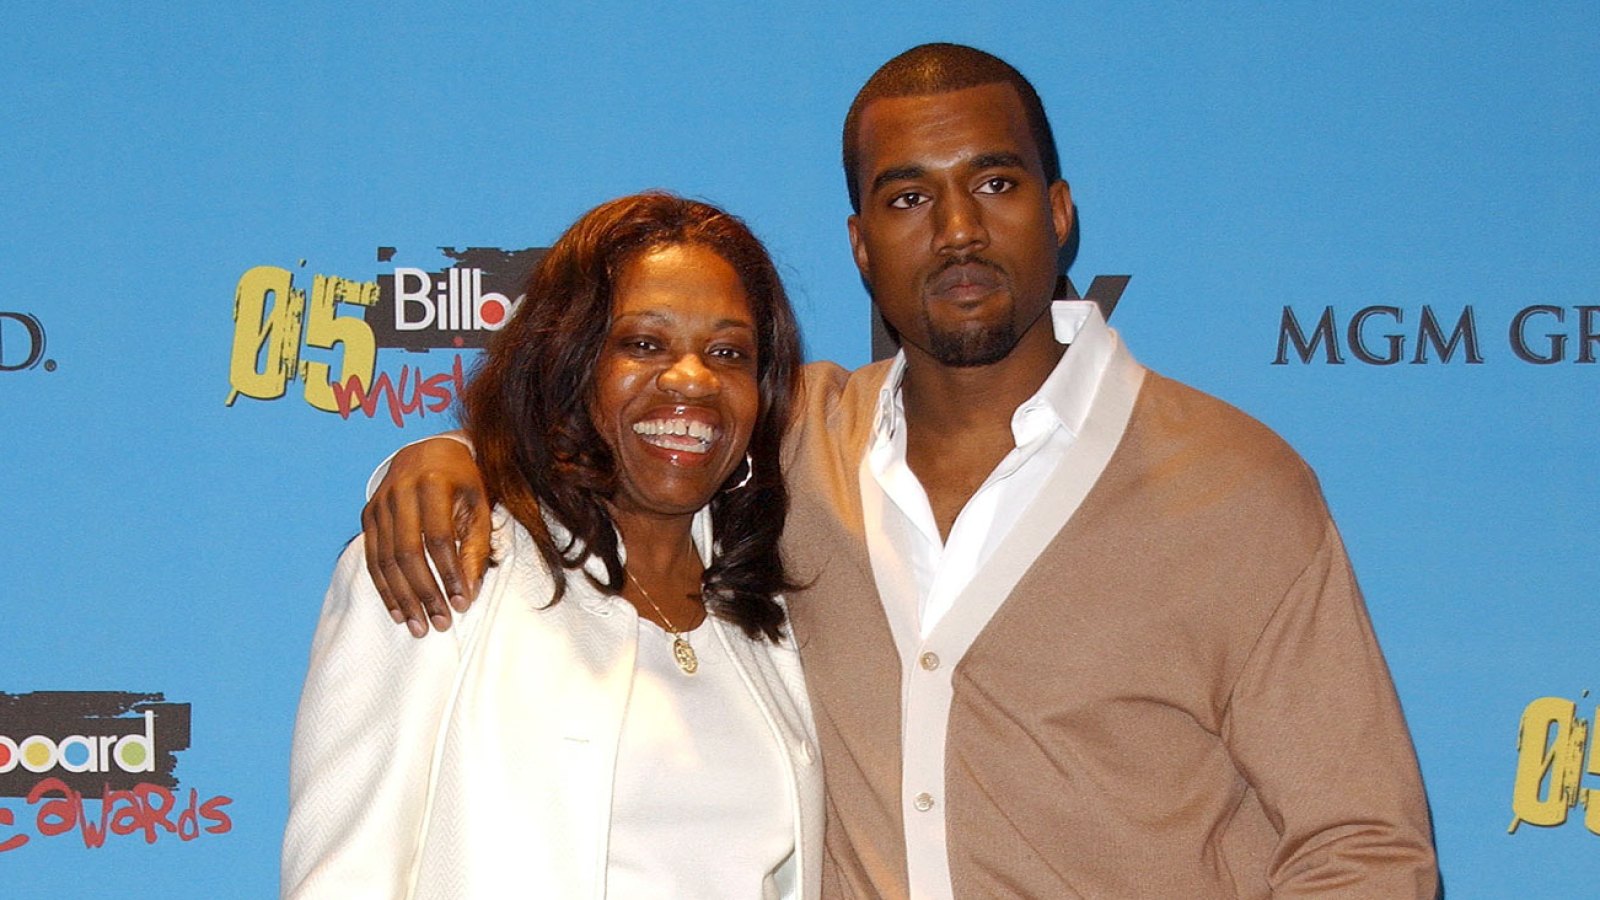 Kanye West Shares Childhood Photo With Late Mom Donda 14 Years After Her Death